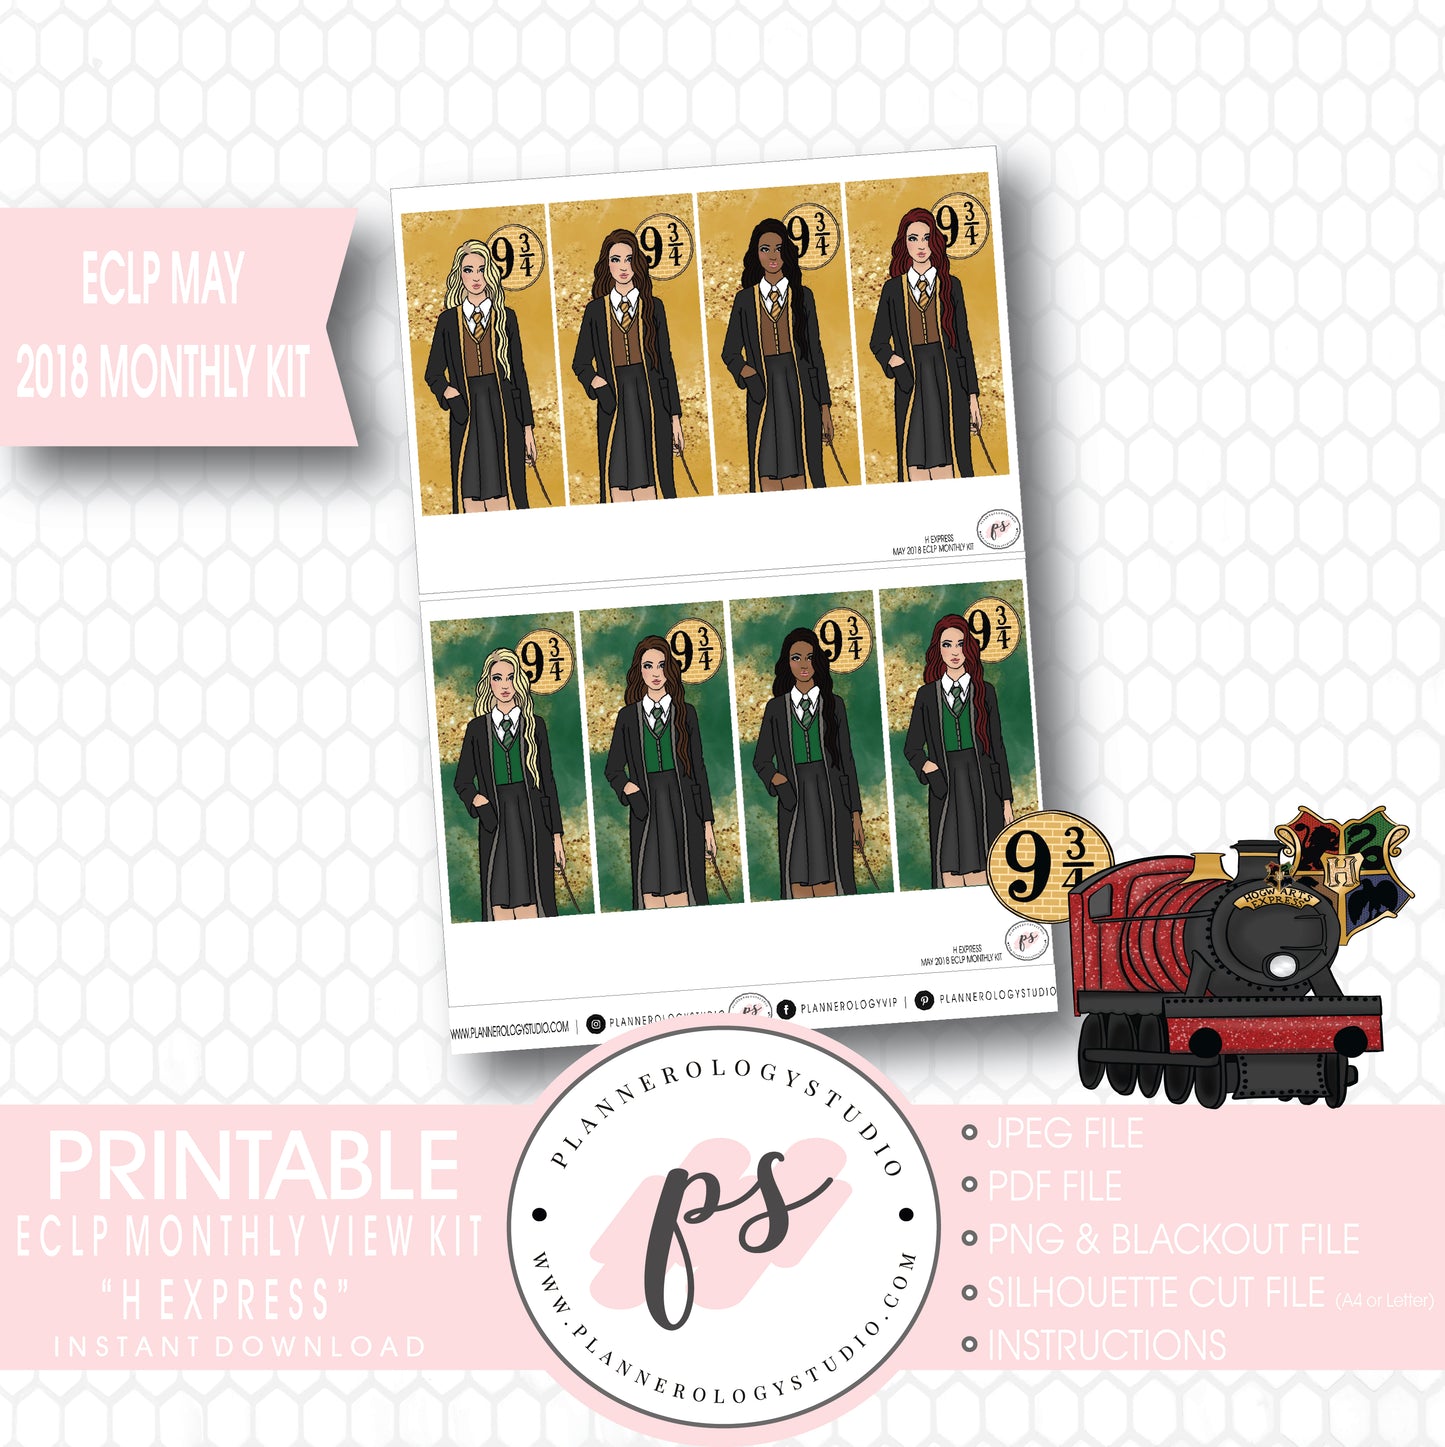 H Express (Harry Potter) May 2018 Monthly View Kit Digital Printable Planner Stickers (for use with Erin Condren) - Plannerologystudio